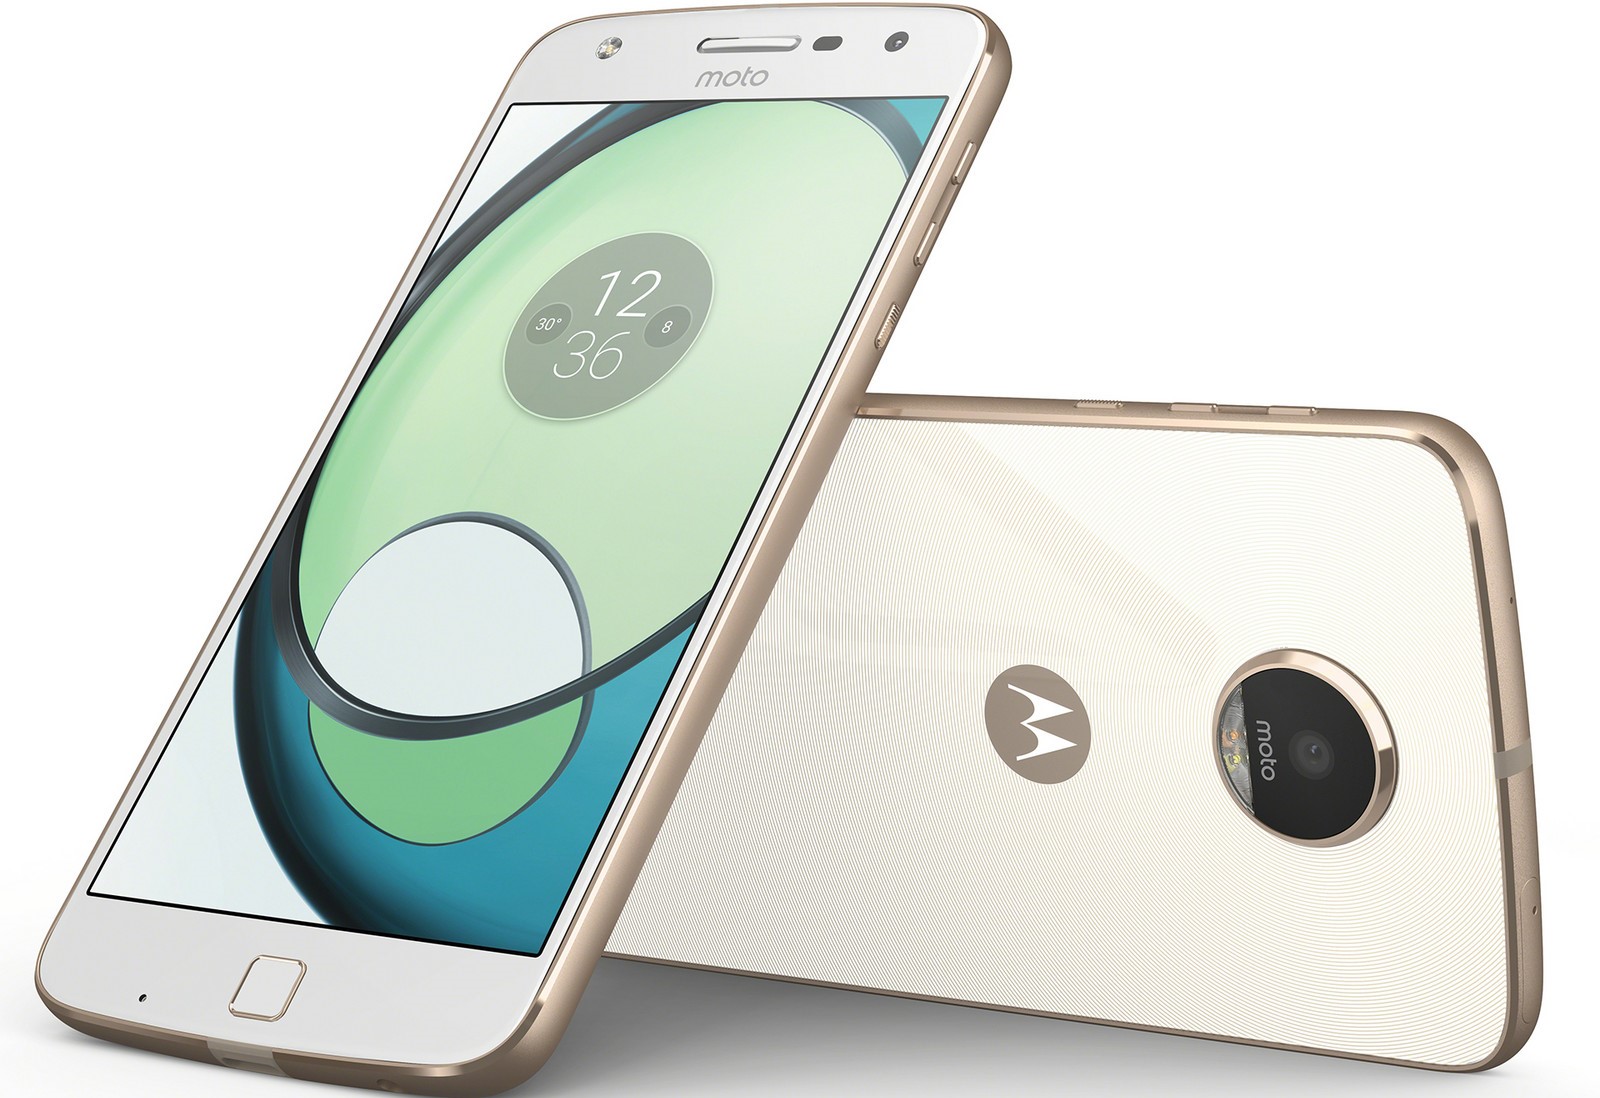 Launched in 2016, the Moto Z series